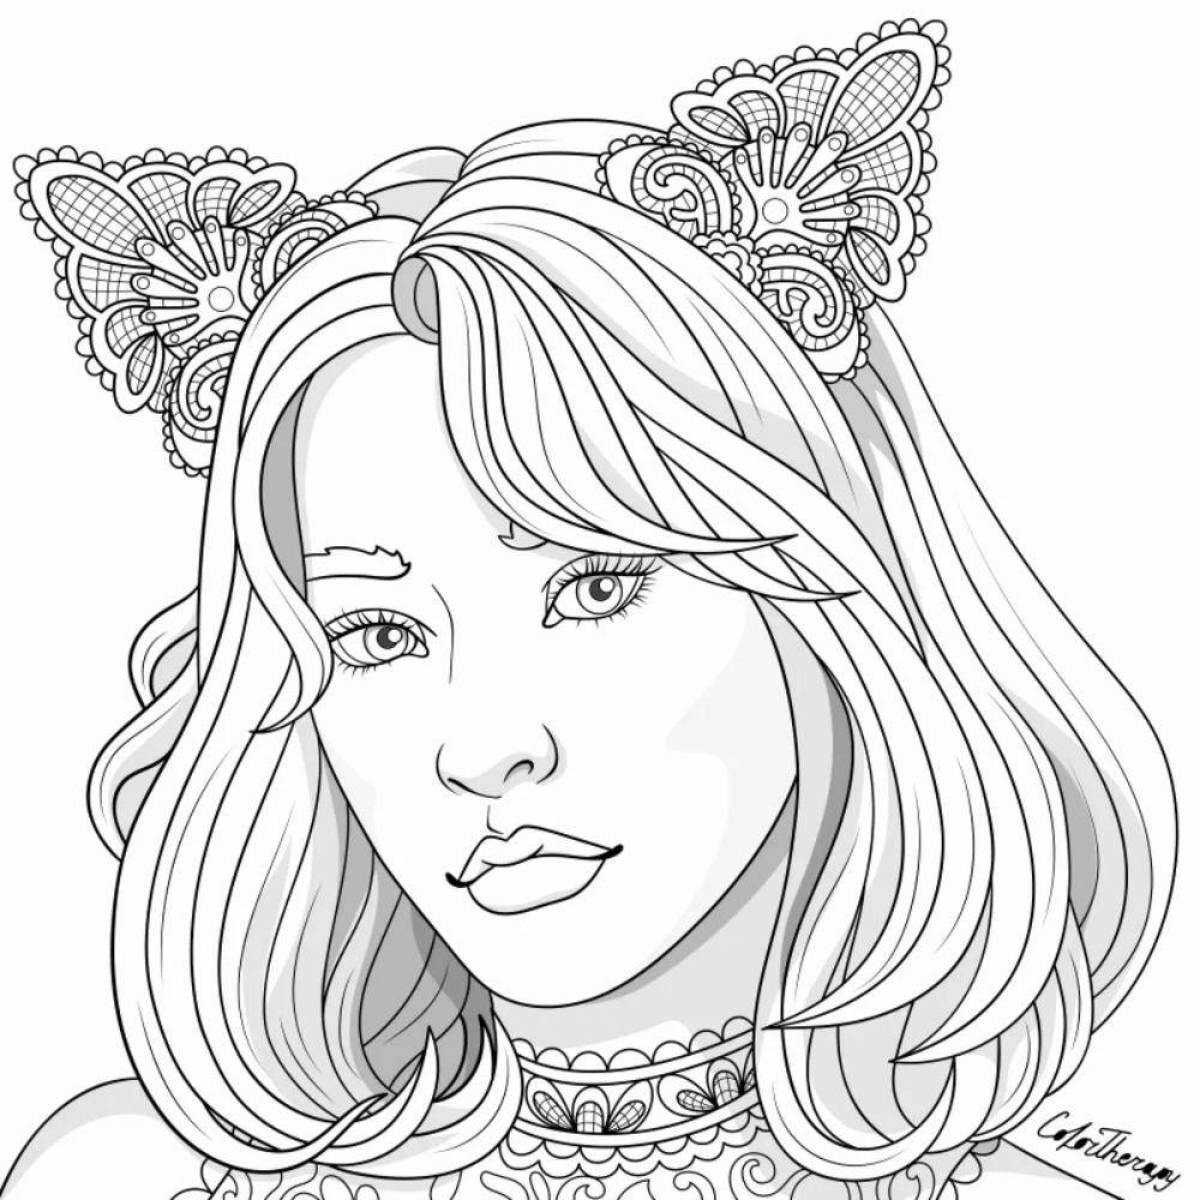 Amazing coloring pages for girls 12 years old, fashion